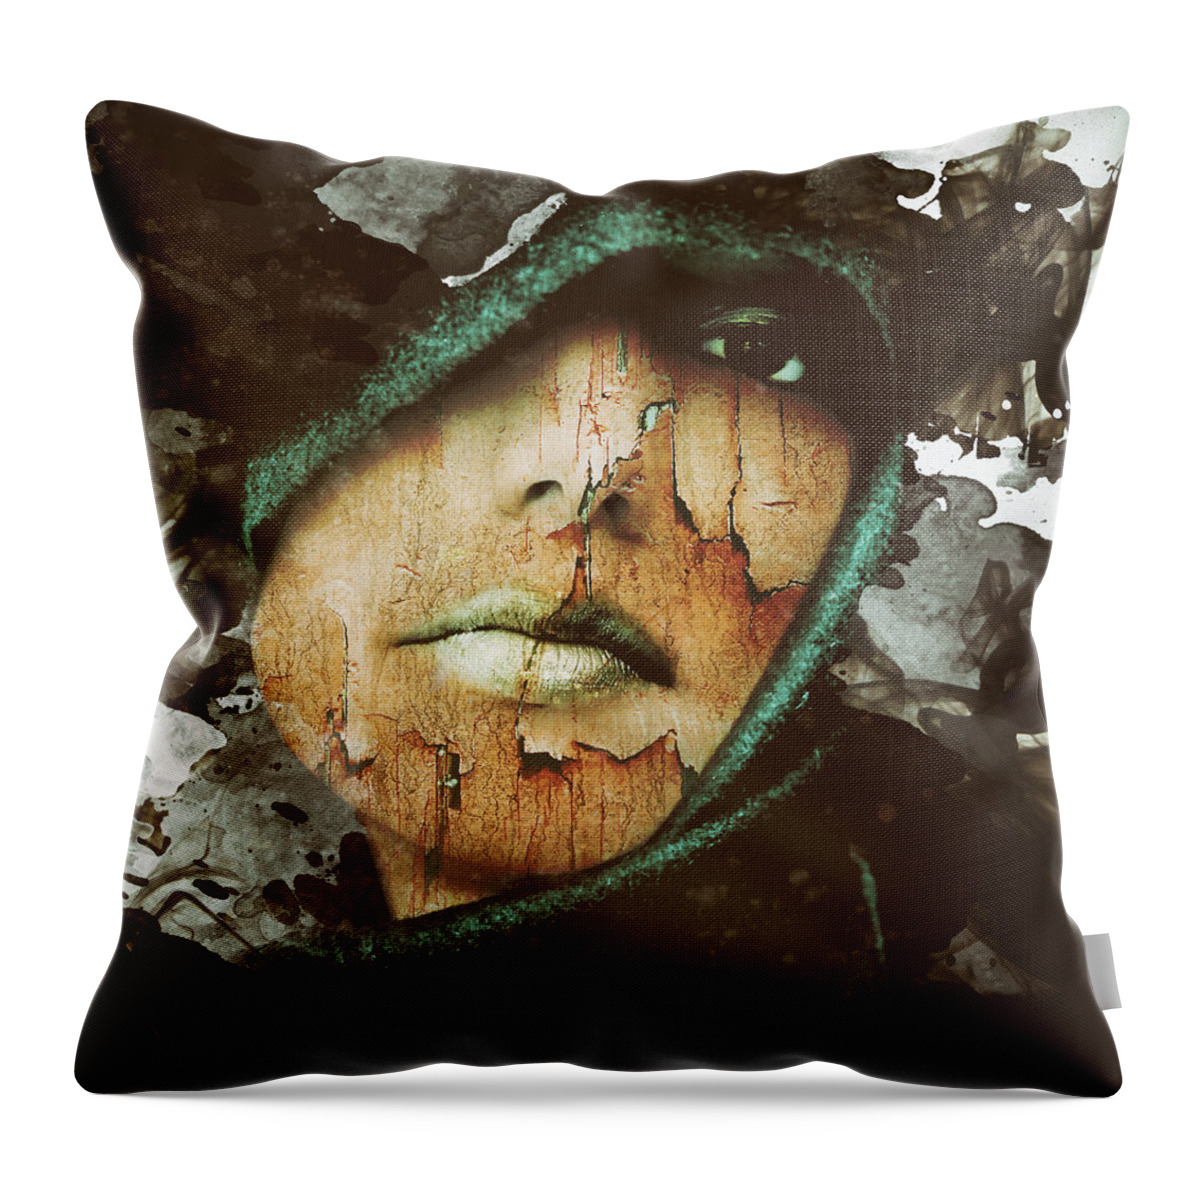 Abstract Surreal Portrait Texture Throw Pillow featuring the digital art The Watcher by Katherine Smit